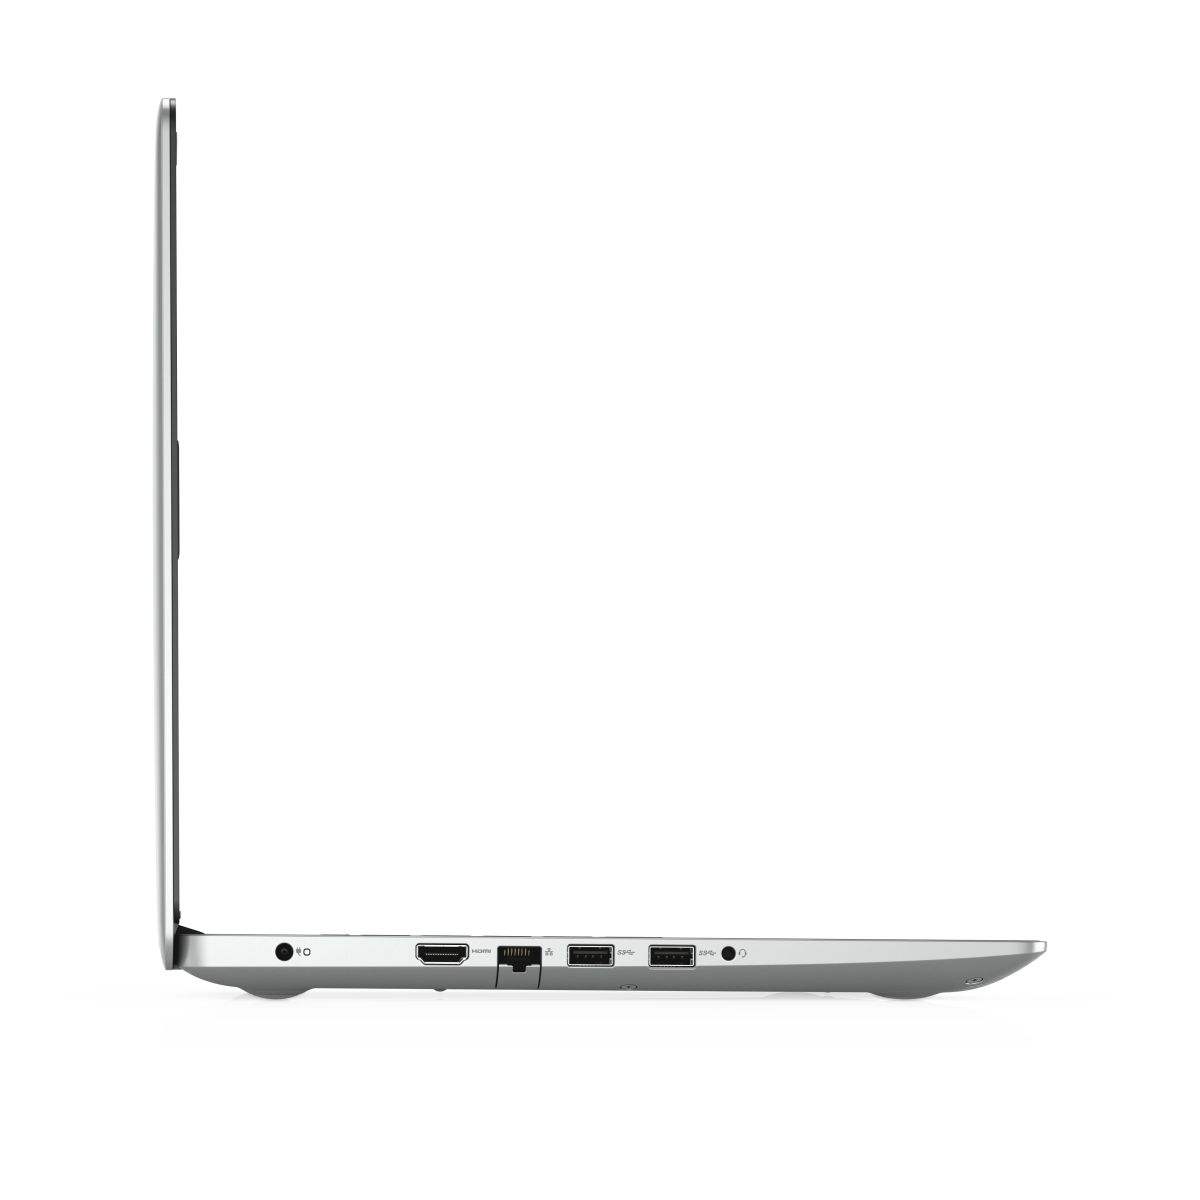 DELL Inspiron 3580 - 3580-4961 laptop specifications